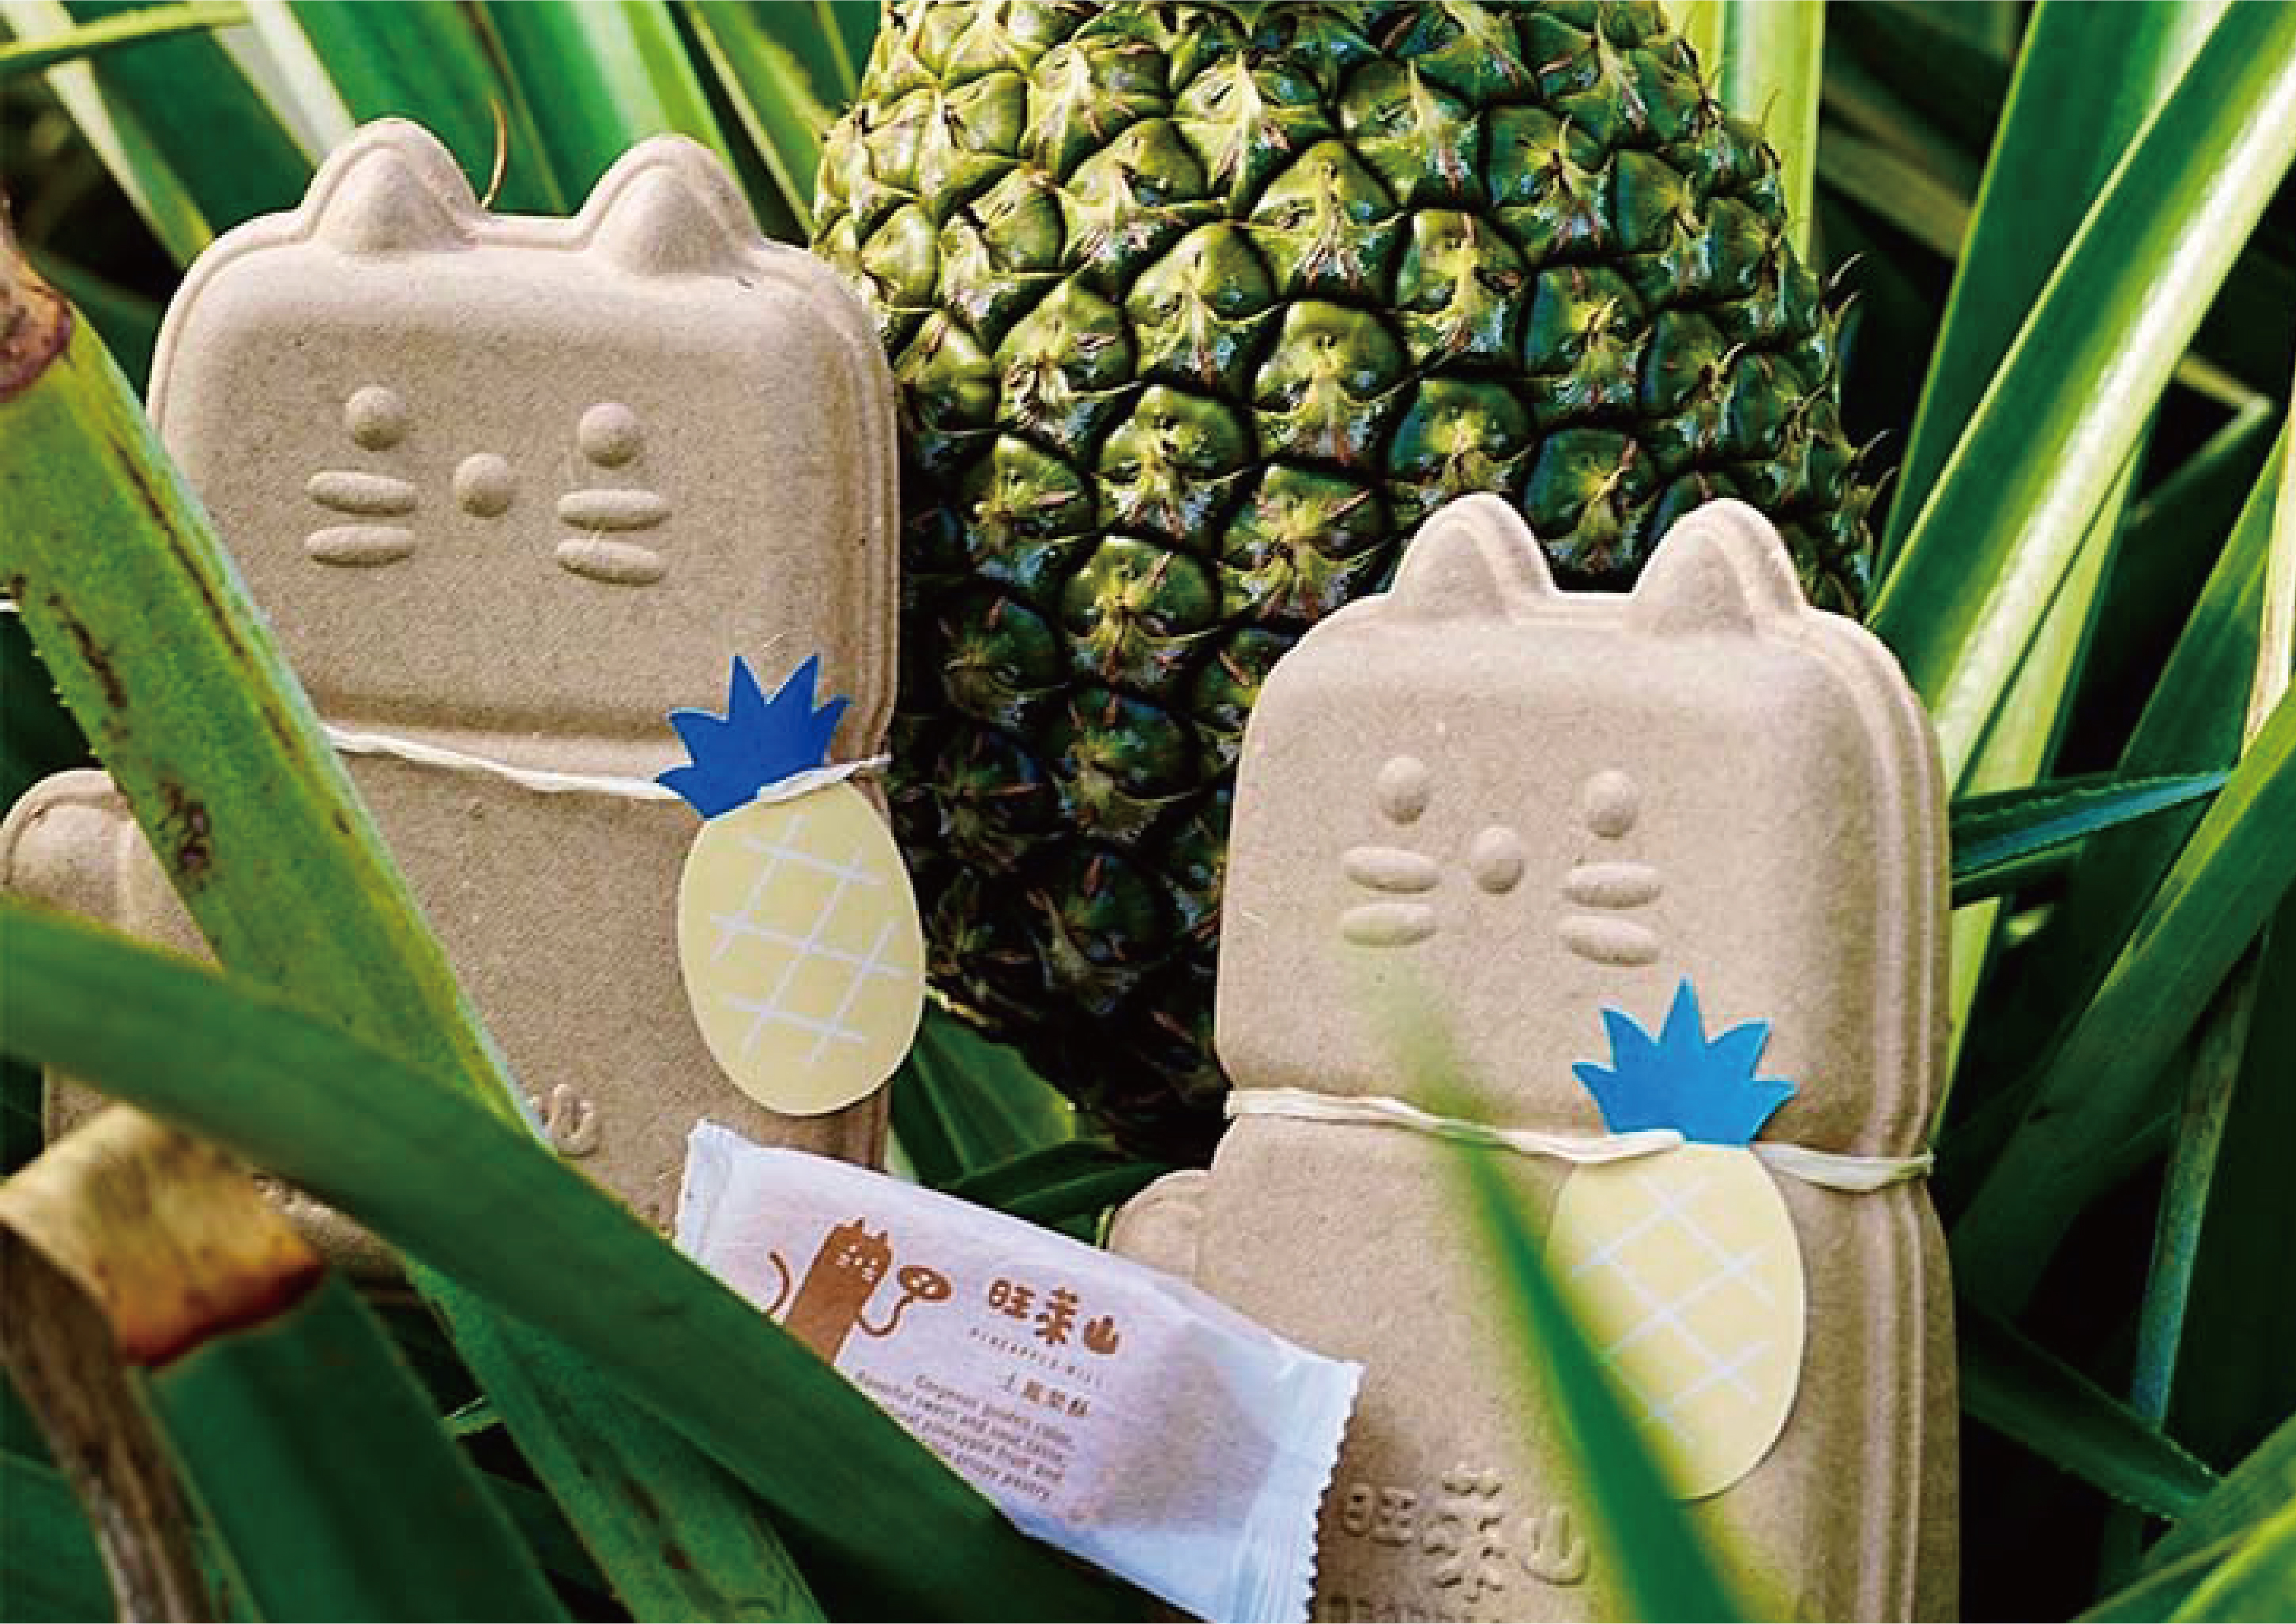 Pineapple Fiber-recycled paper pulp packaging